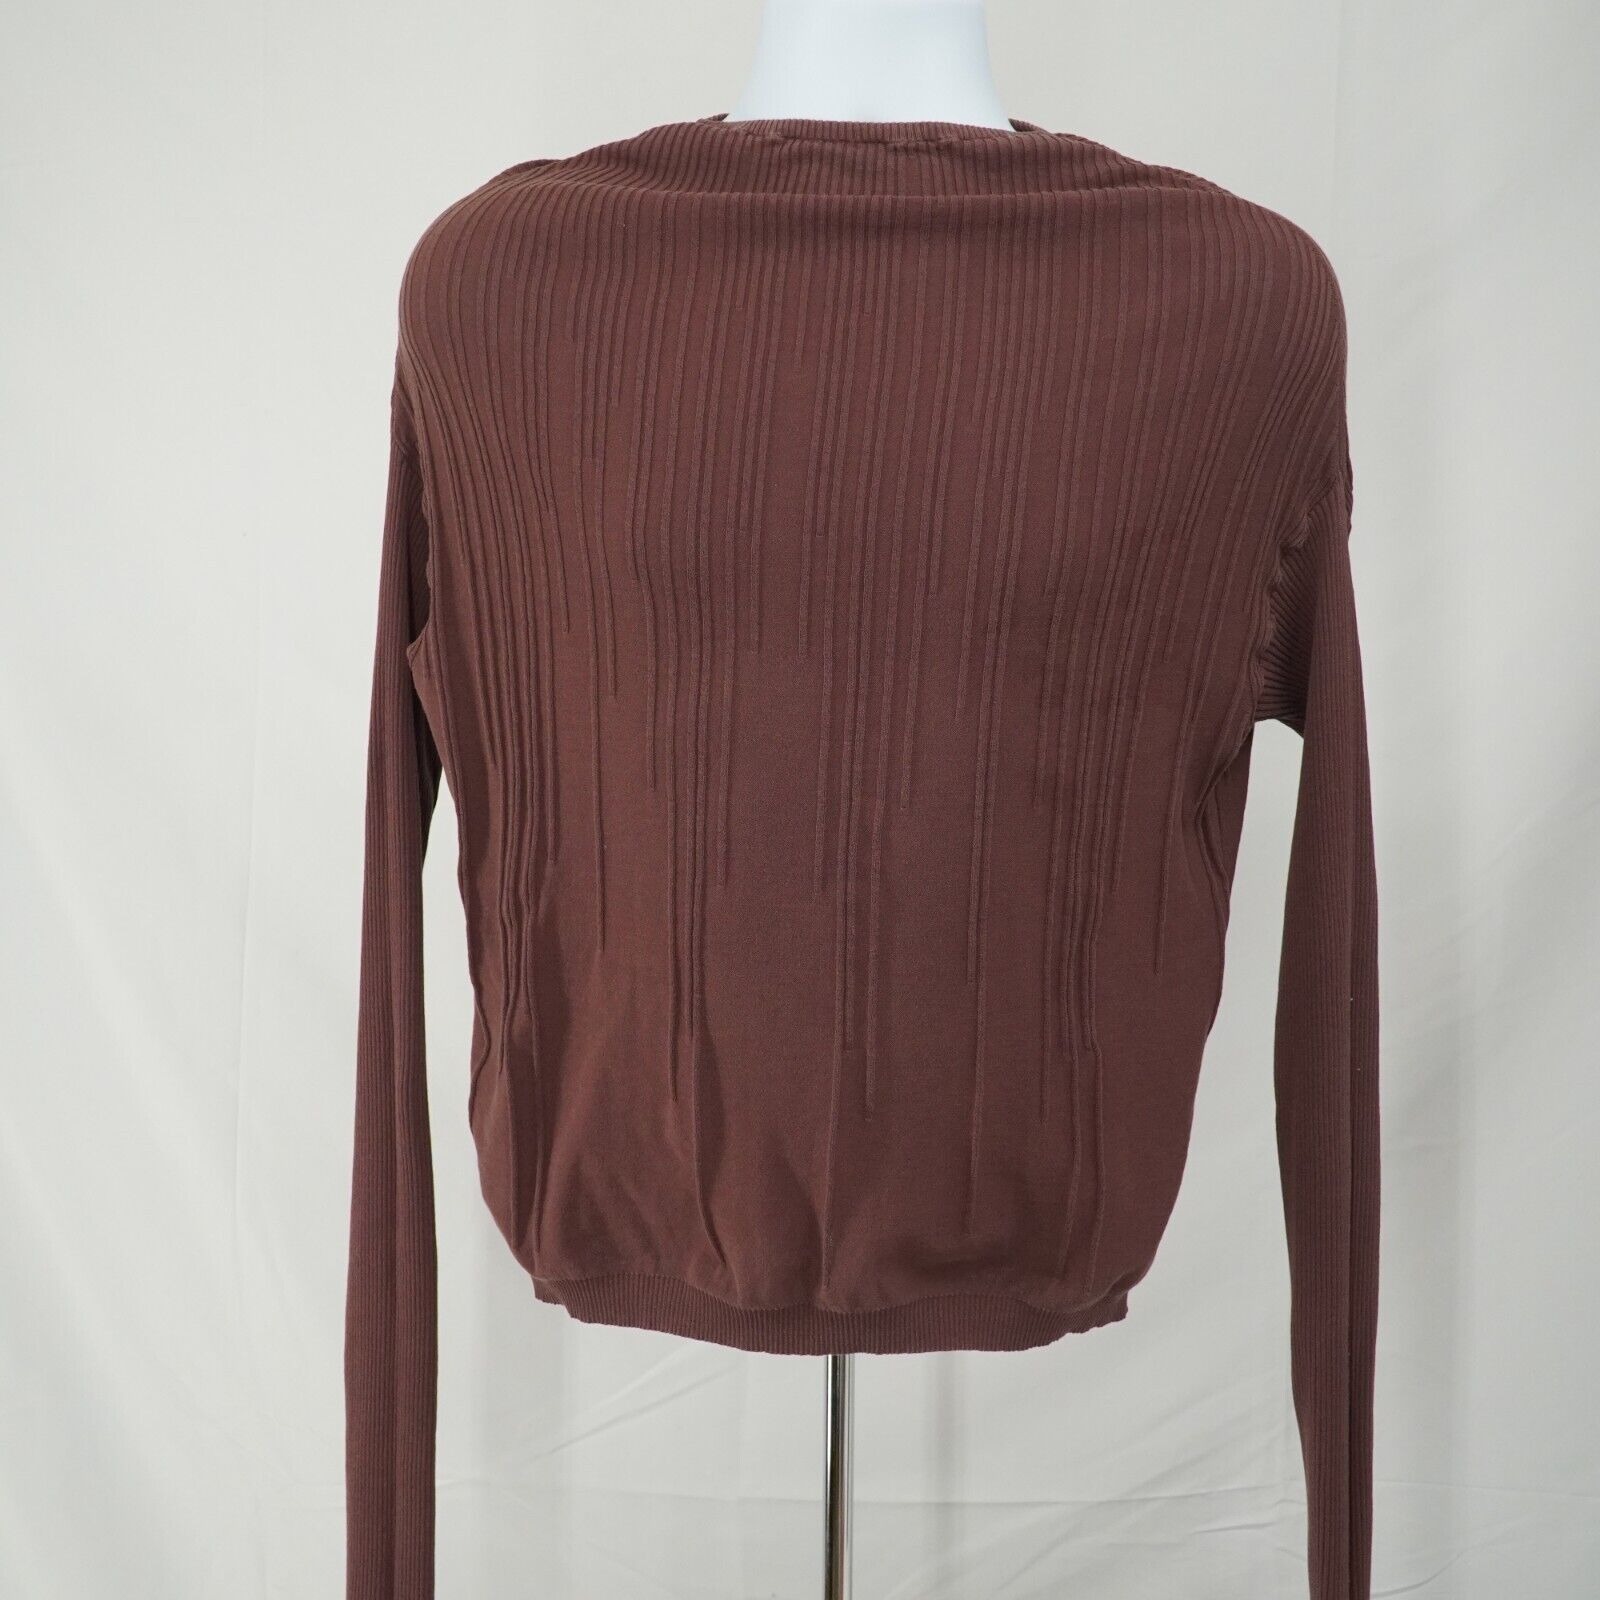 Ribbed Sweater SS17 Walrus Throat Burgundy Red - 18